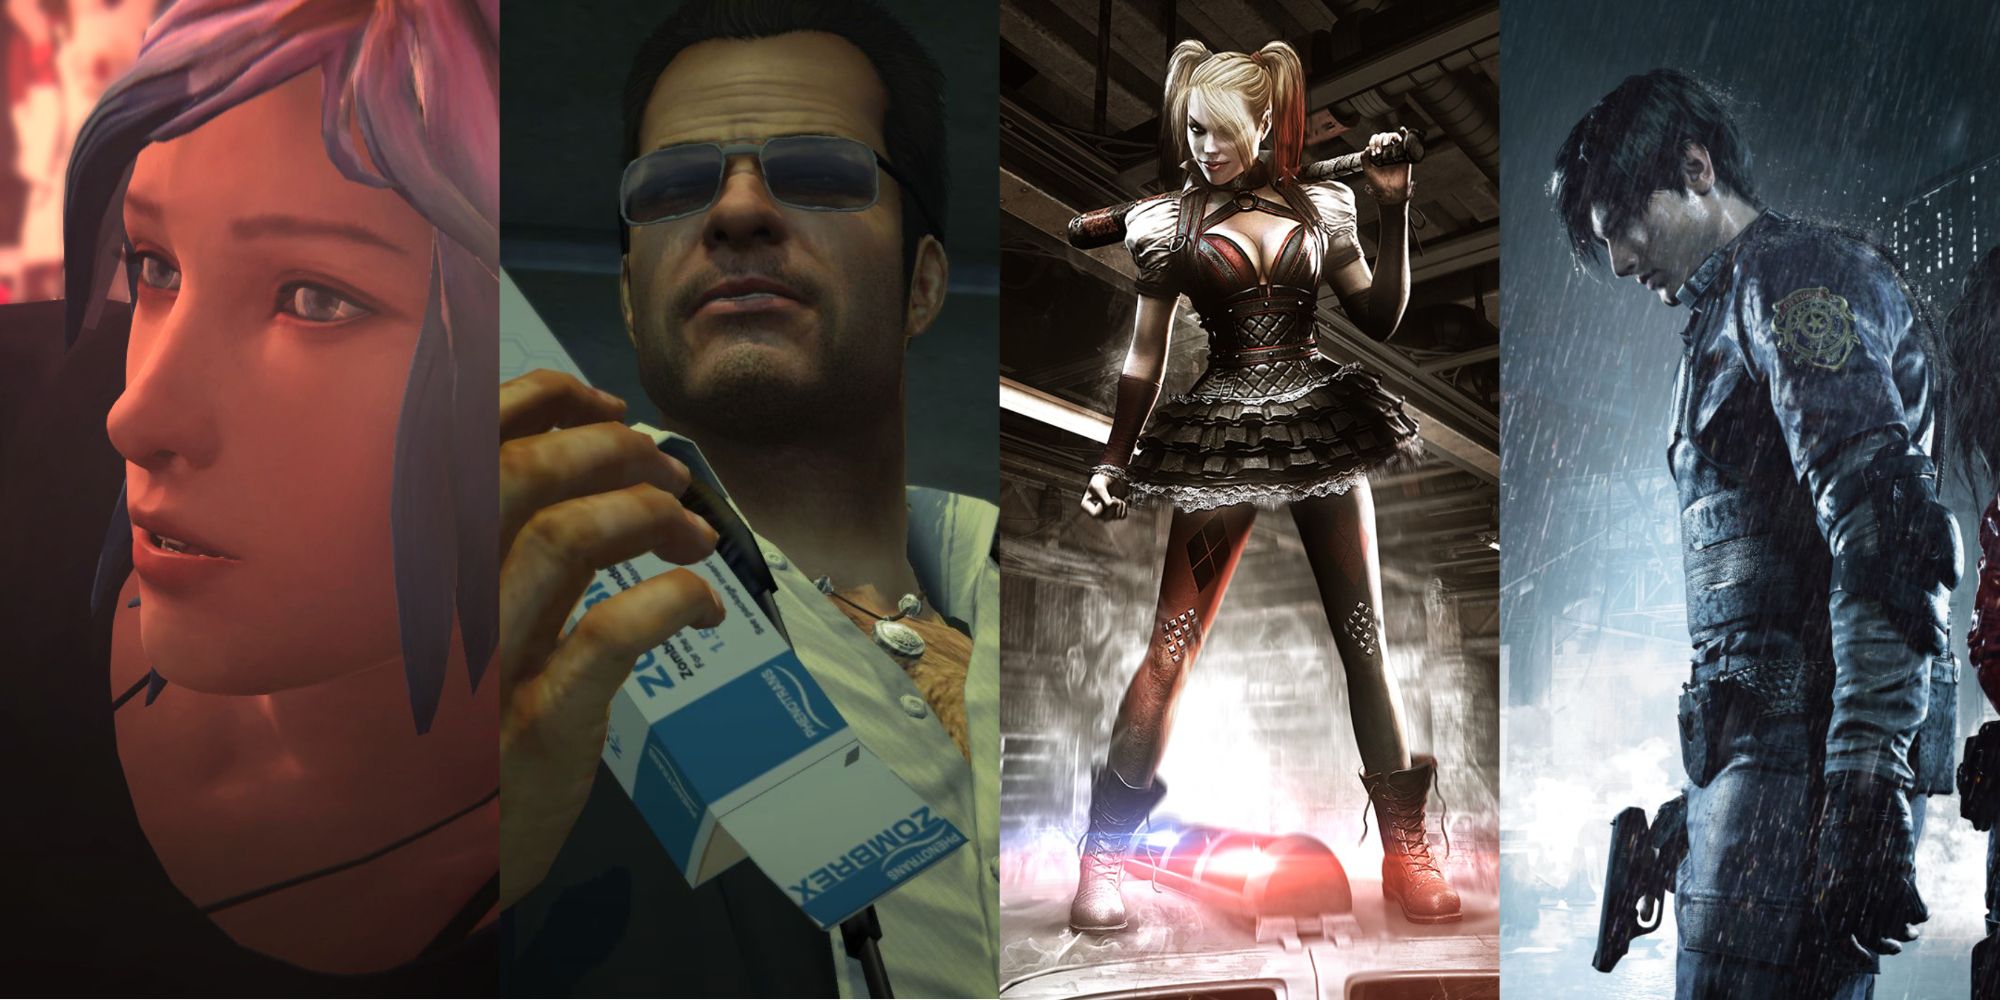 Chole Price from LiS, Frank West from Dead Rising, Harley Quinn from Arkham Knights, and Leon Kennedy for RE2remake